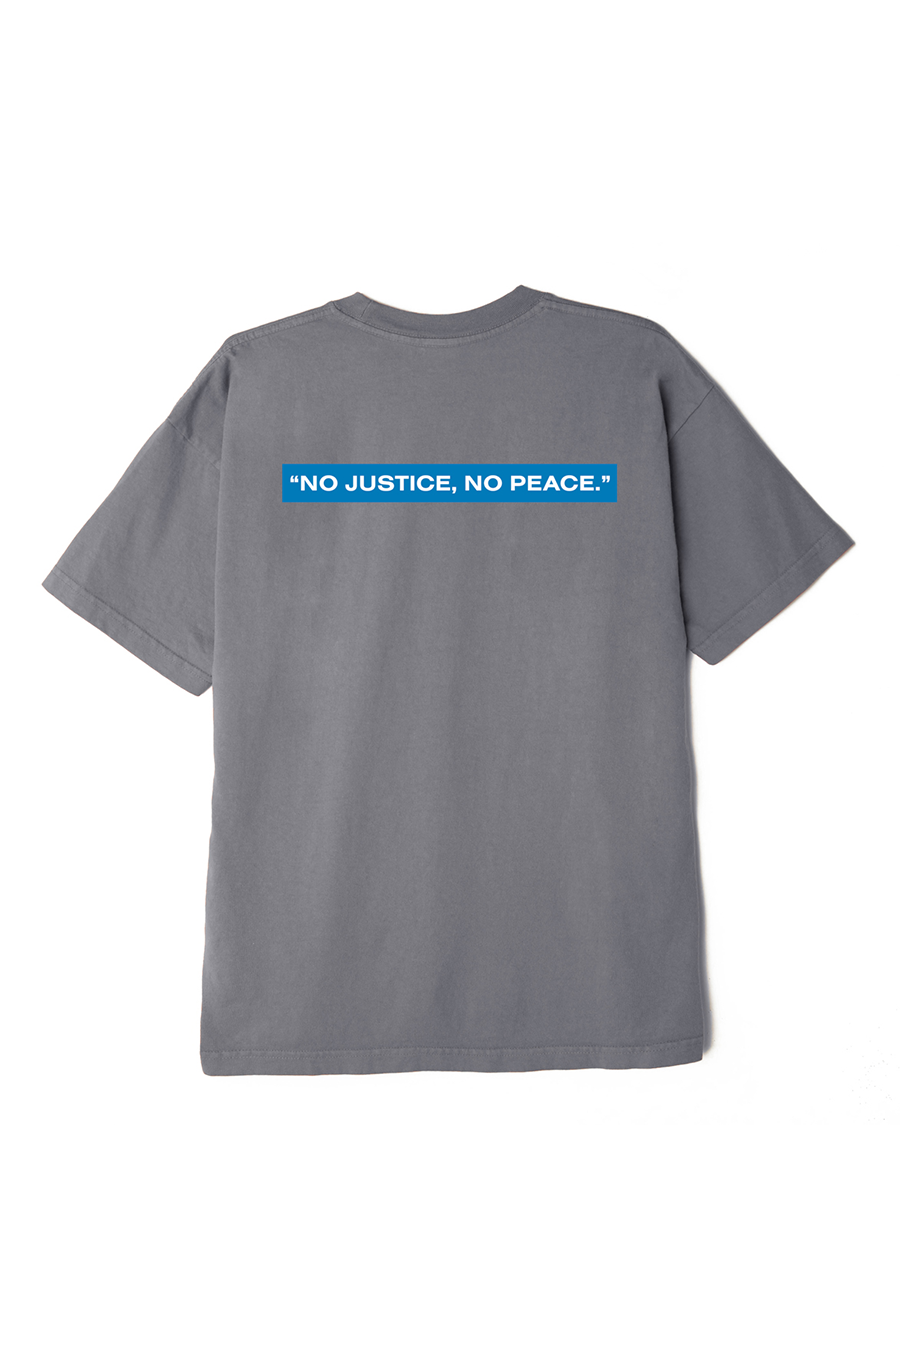 No Justice No Peace Tee | Frost Grey - Main Image Number 1 of 2